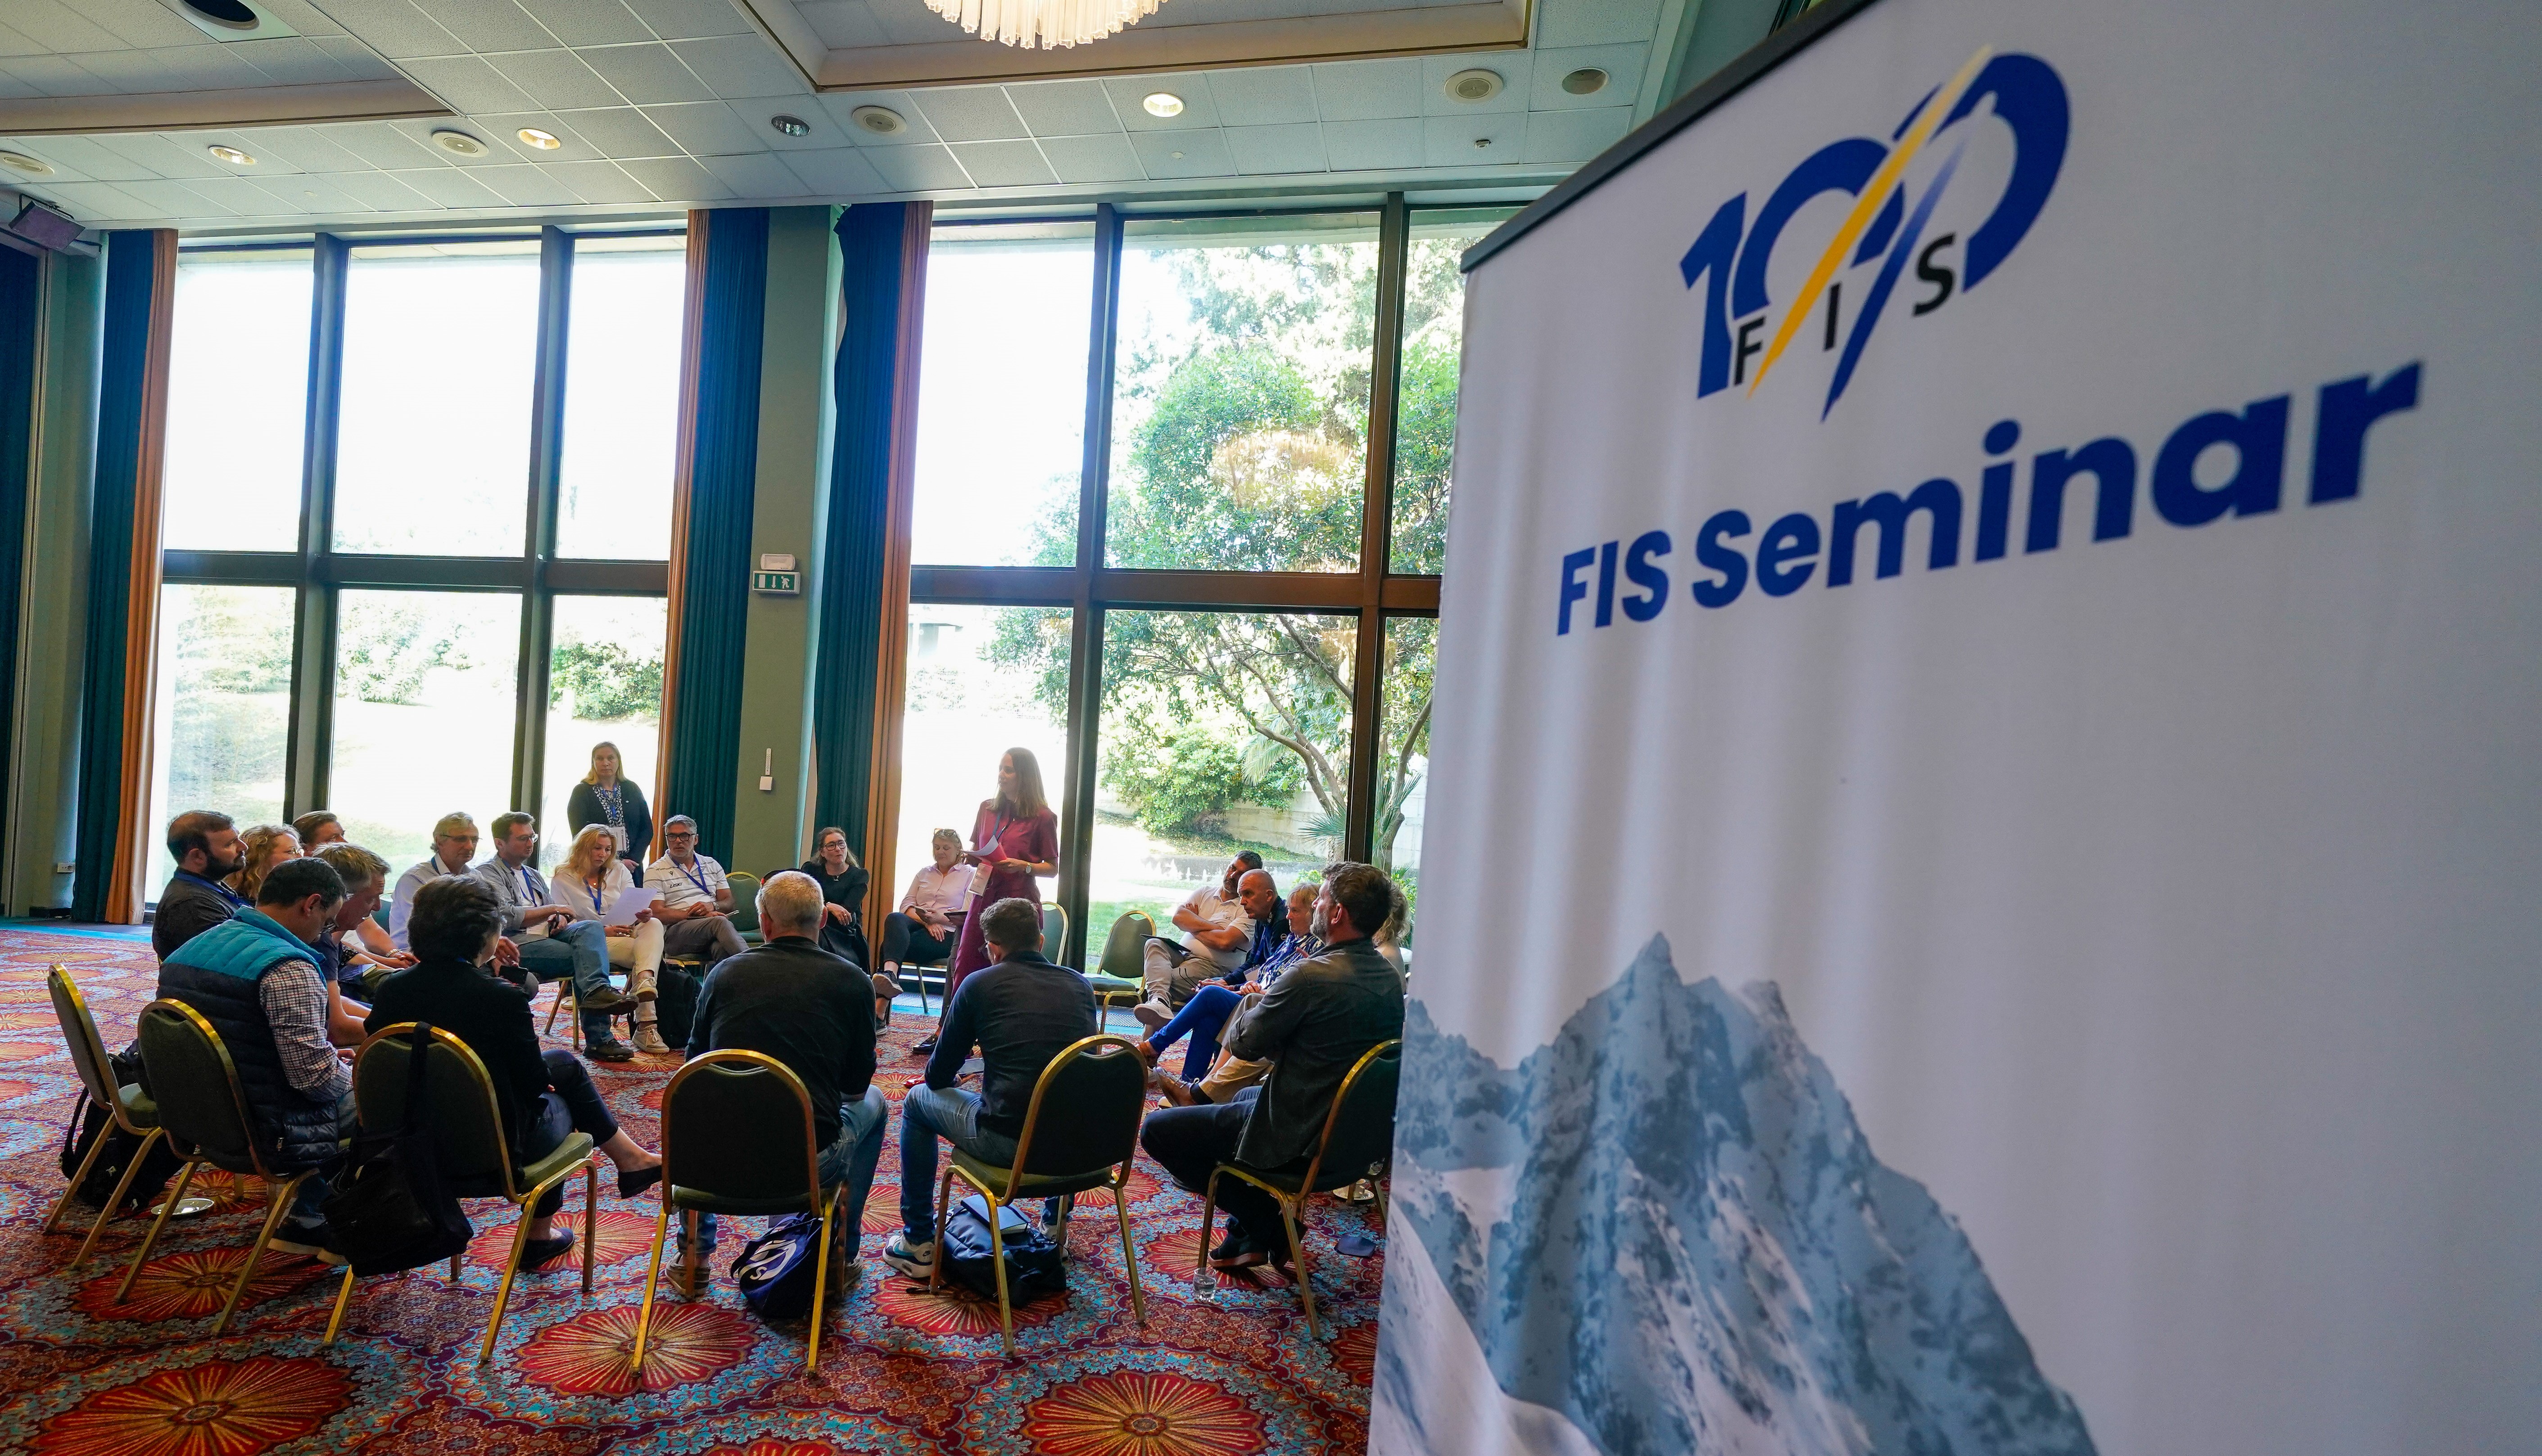 The first FIS Seminar shines a spotlight on the intersection of snow sports and human rights